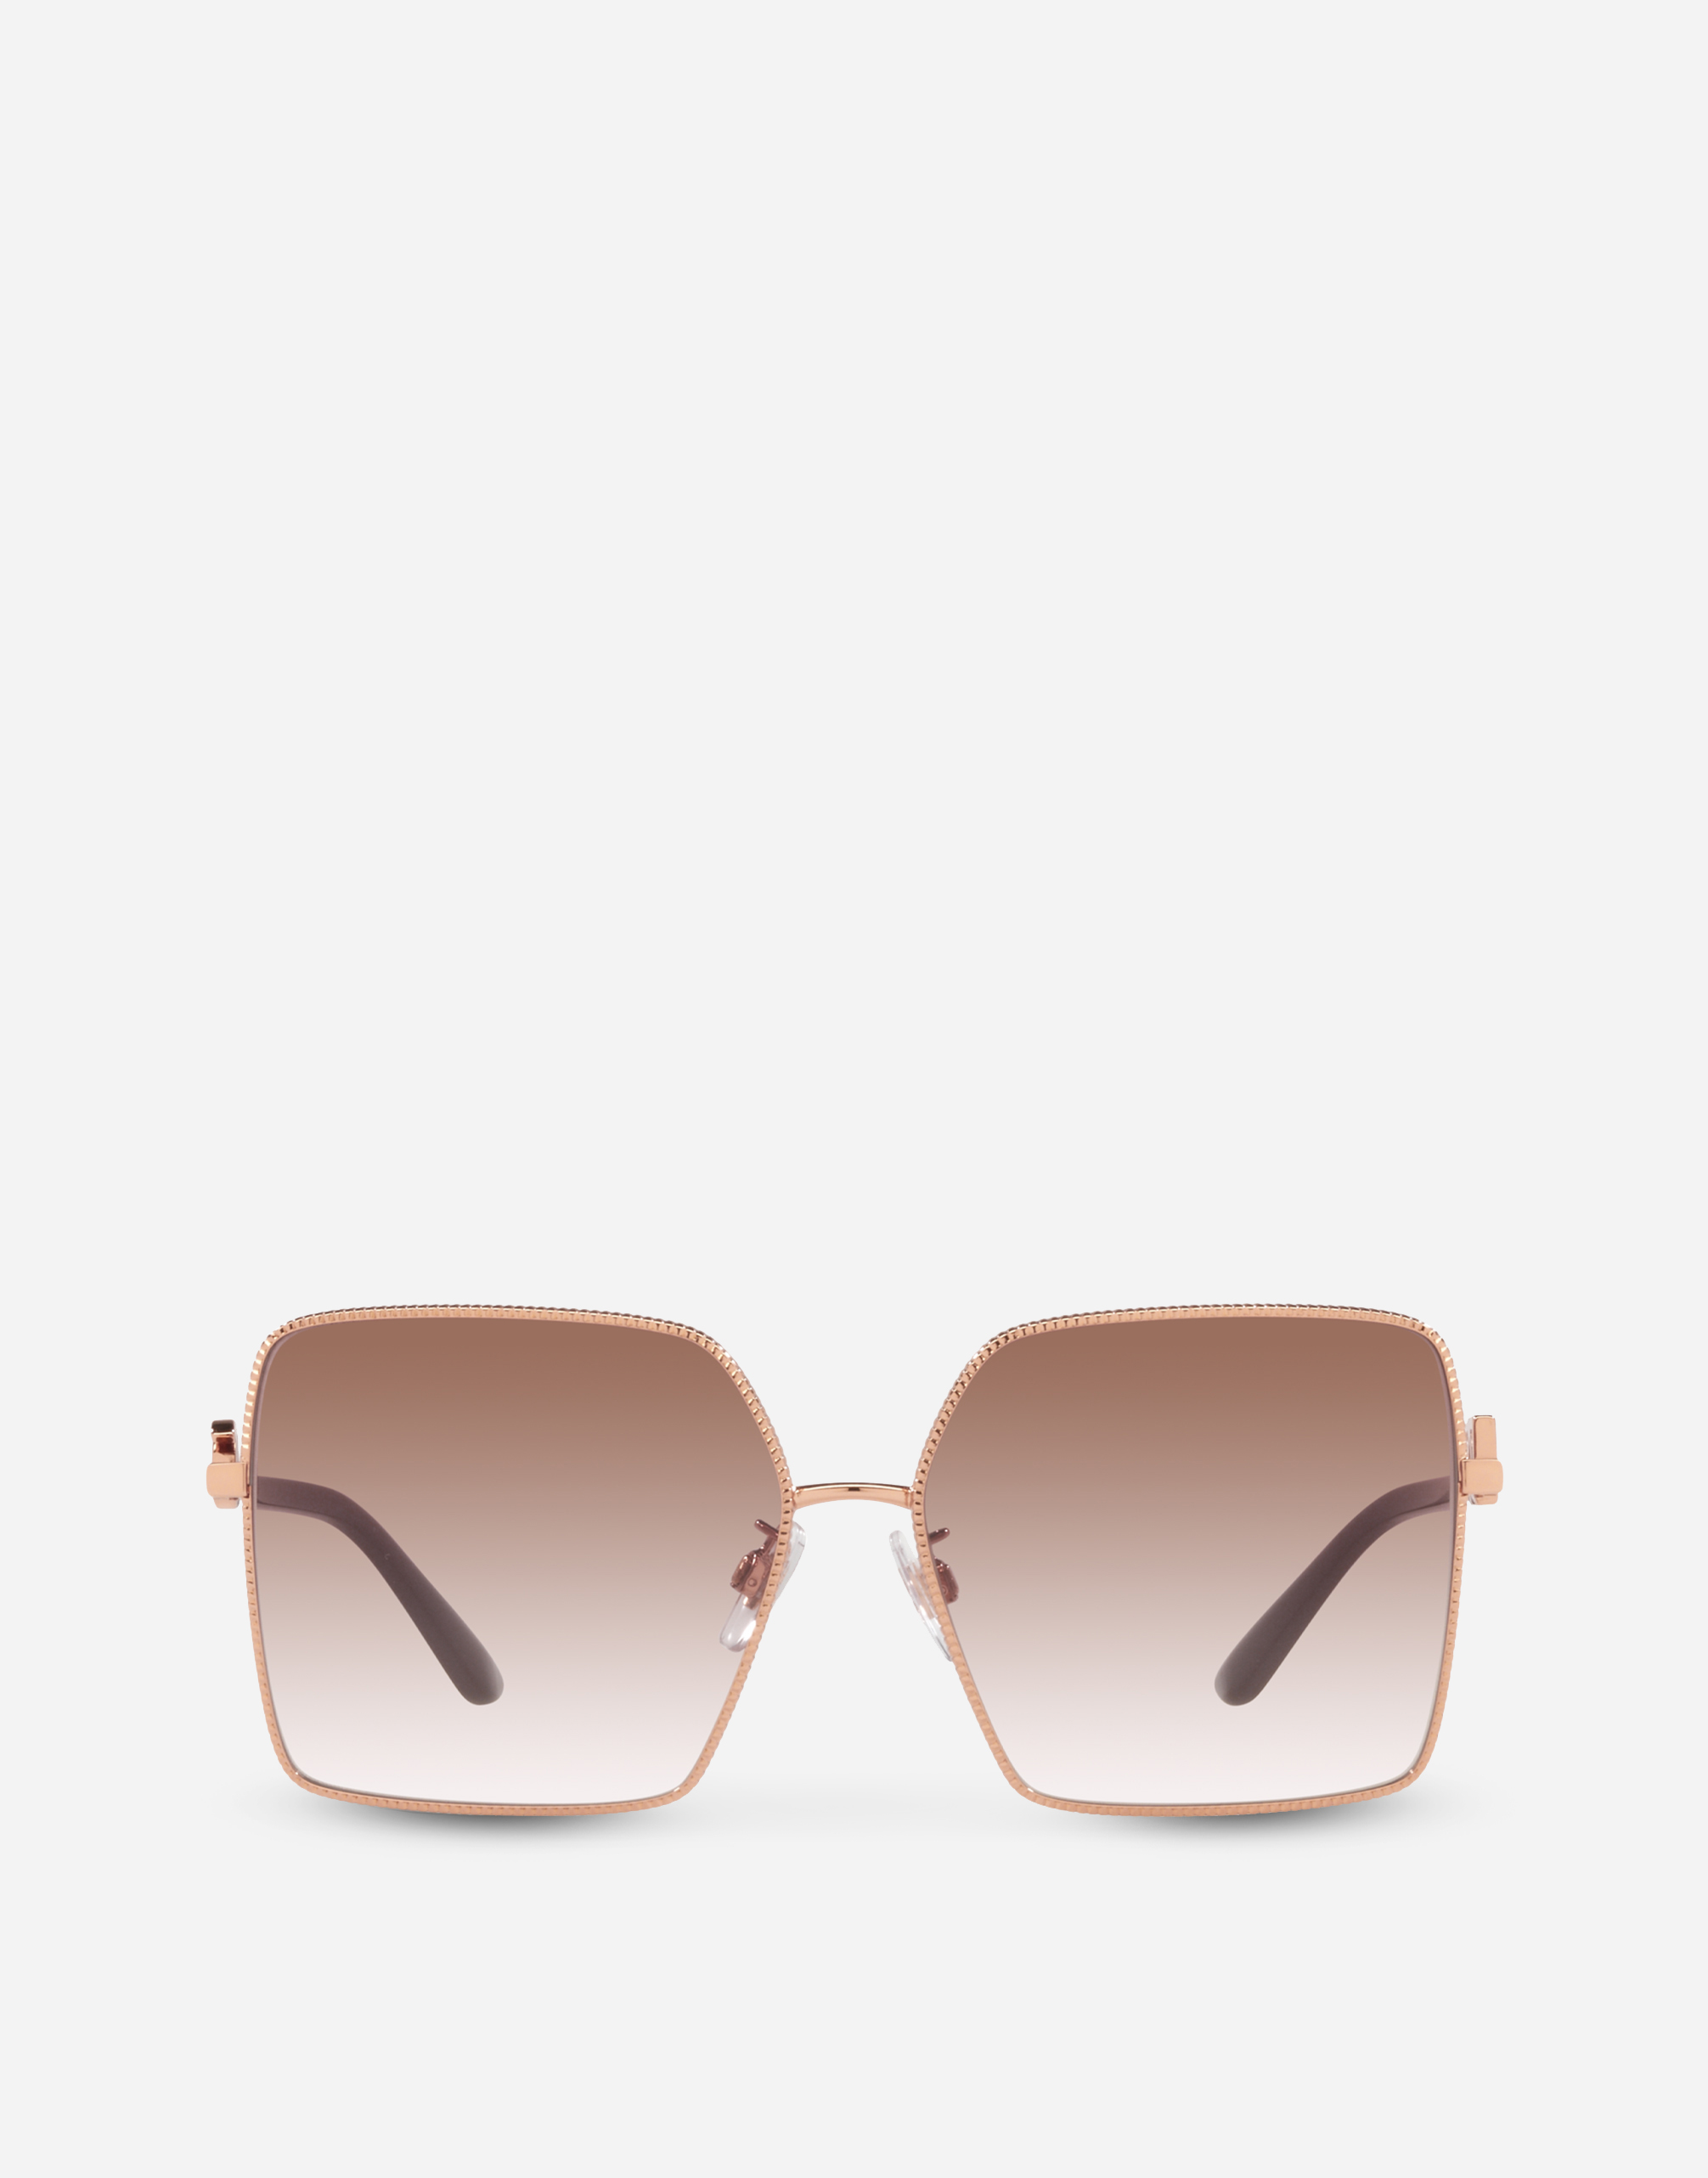 Gros grain sunglasses in Pink gold